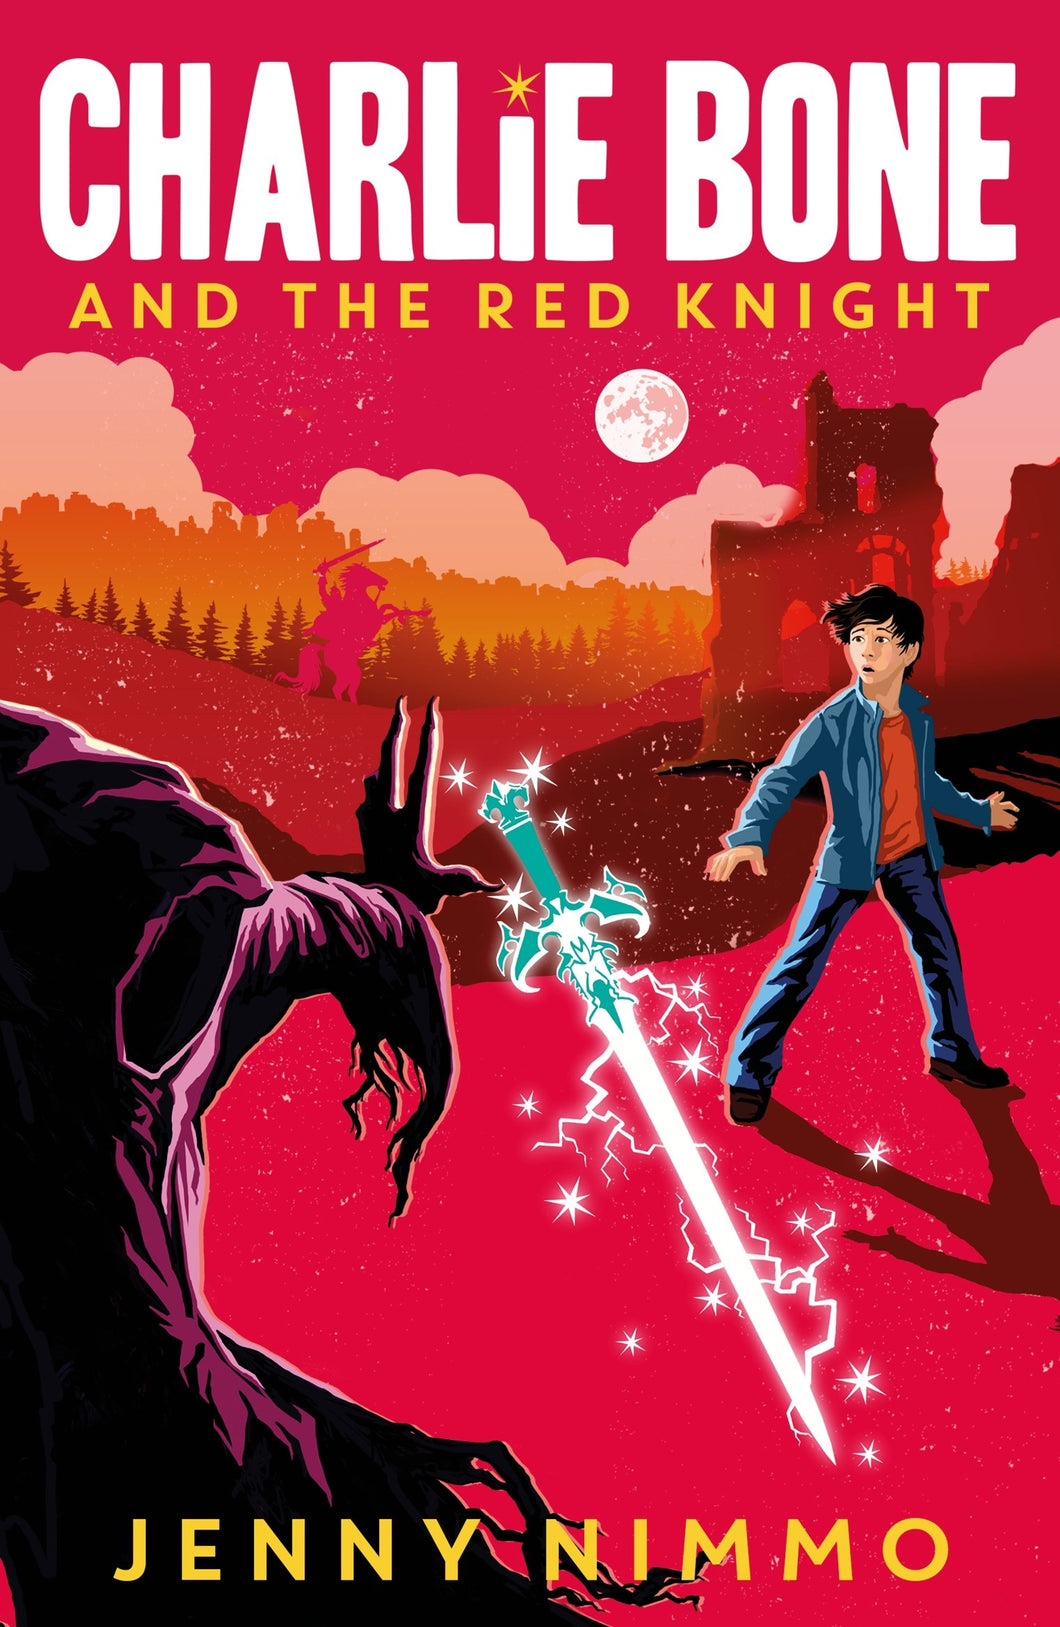 Charlie Bone and the Red Knight (#8)